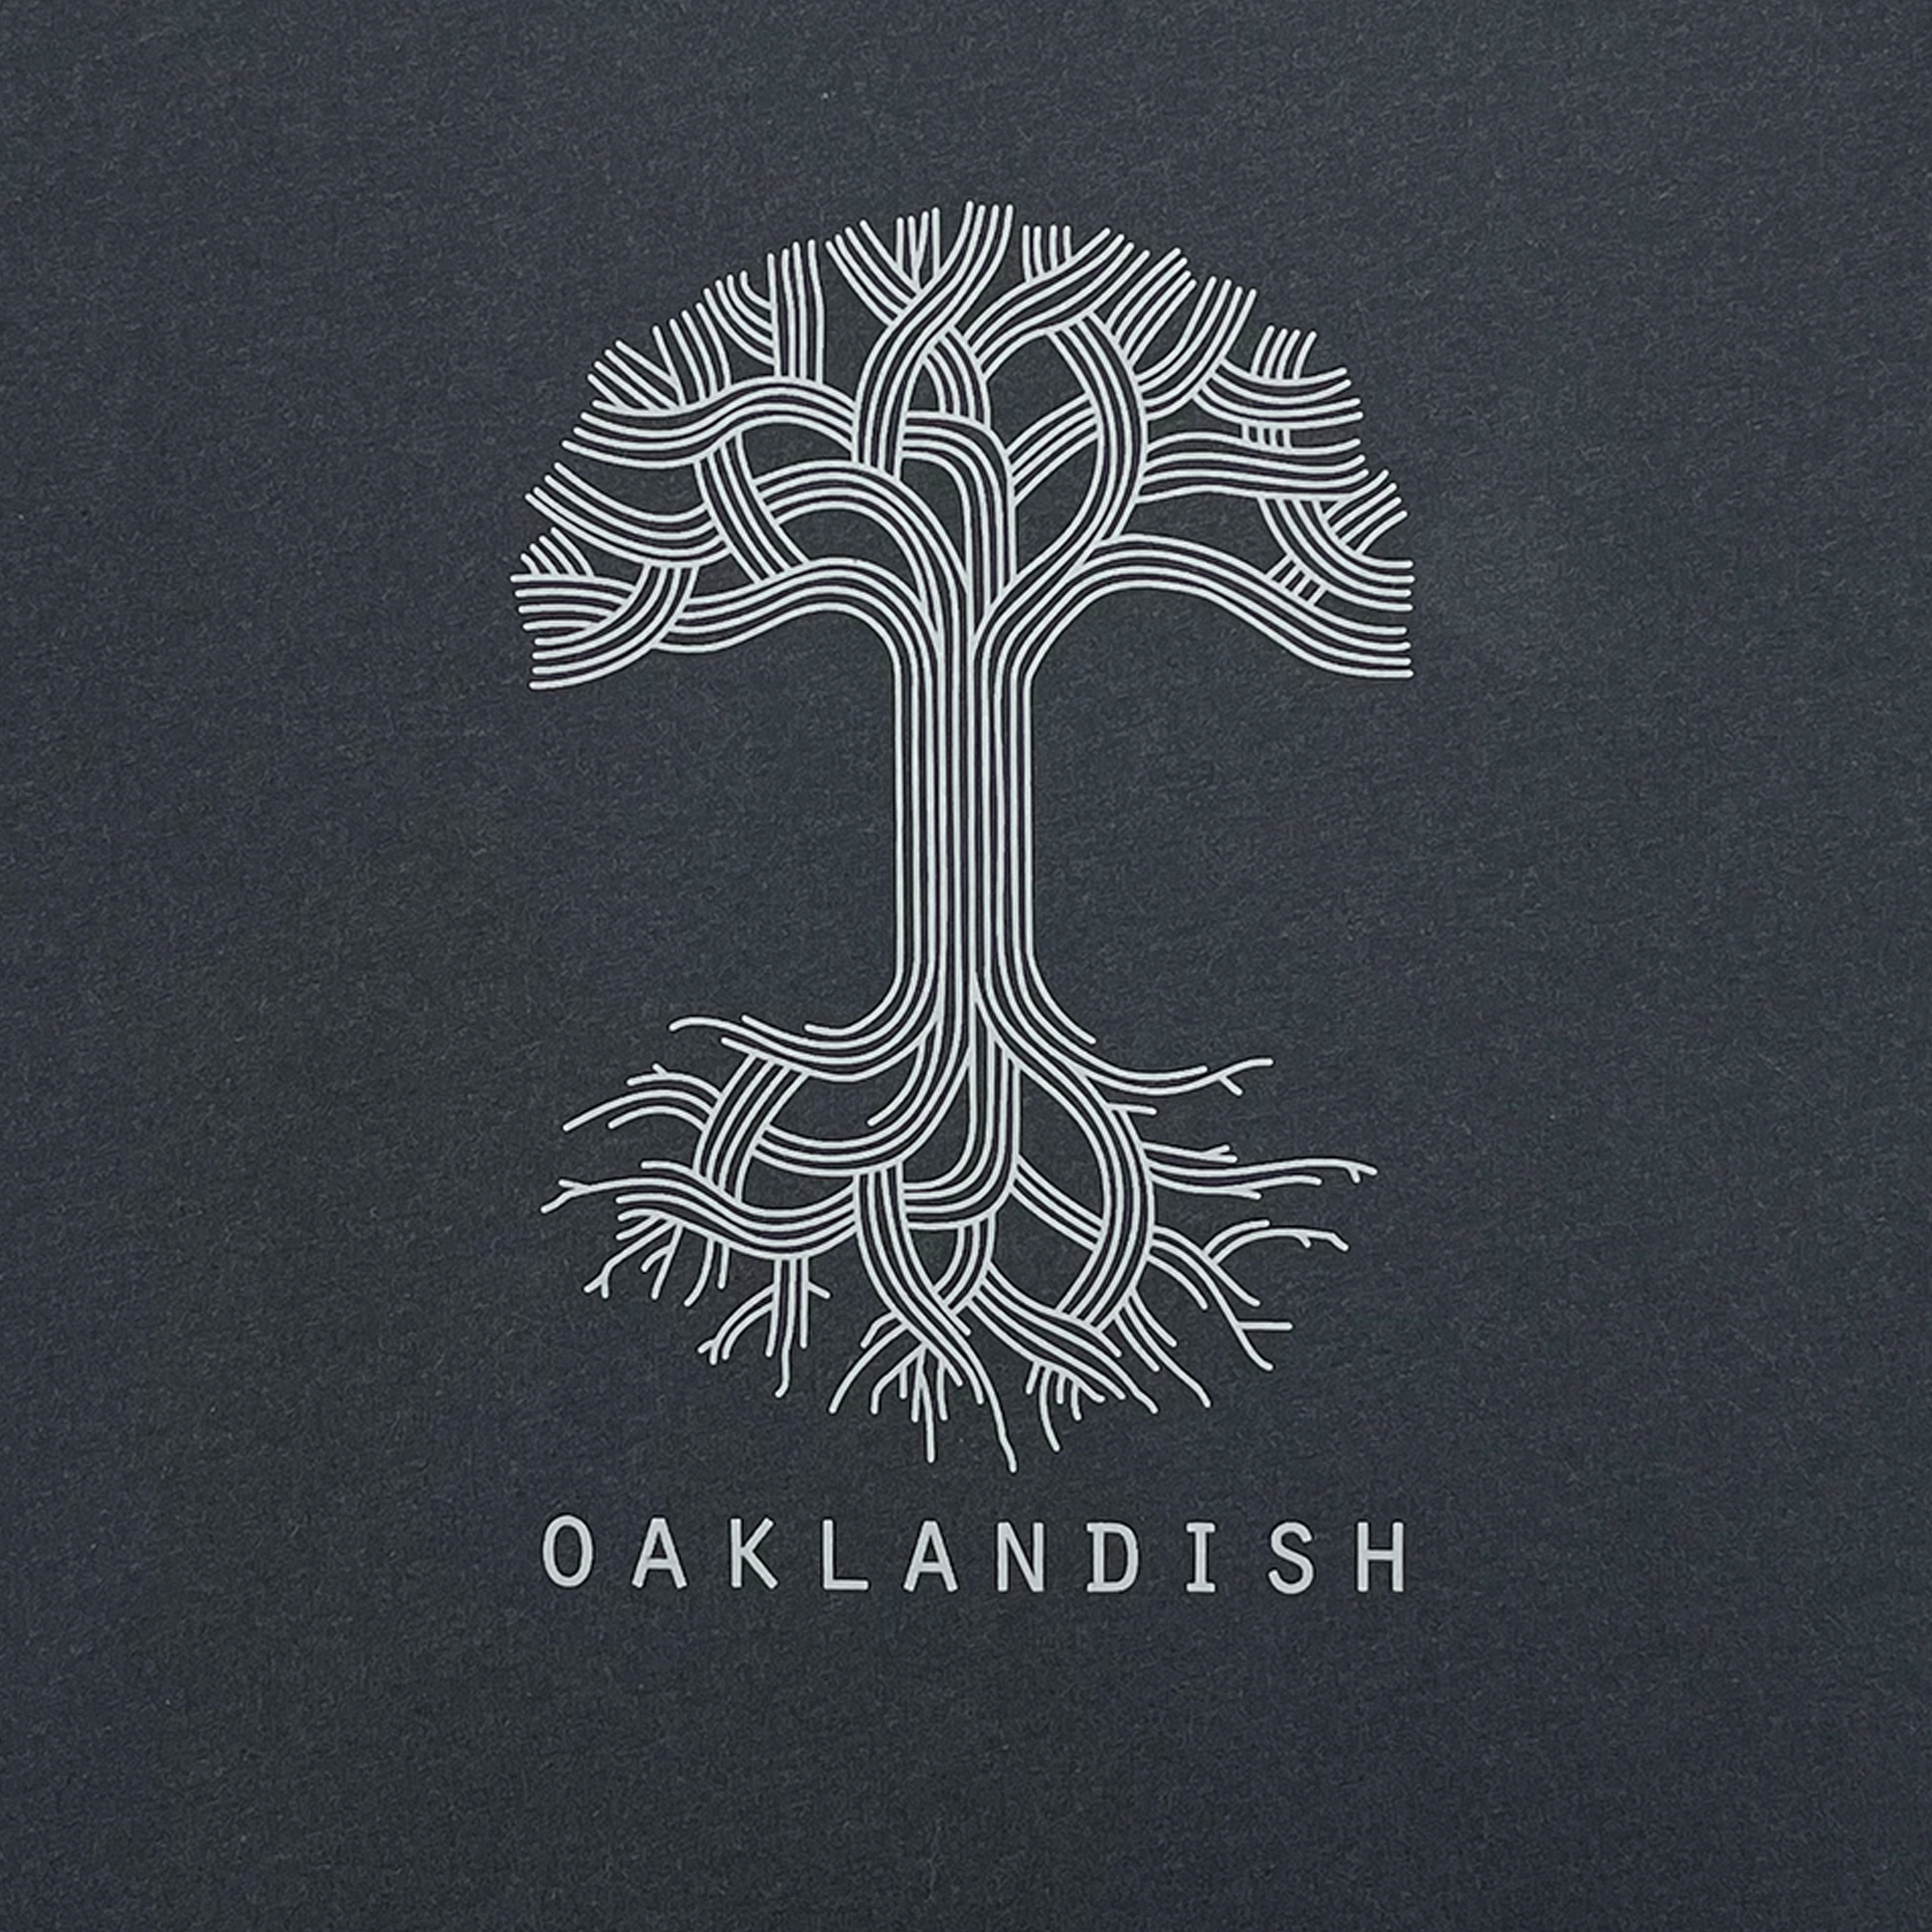 Close-up of an Oaklandish tree graphic with an Oaklandish wordmark on a heather black t-shirt.